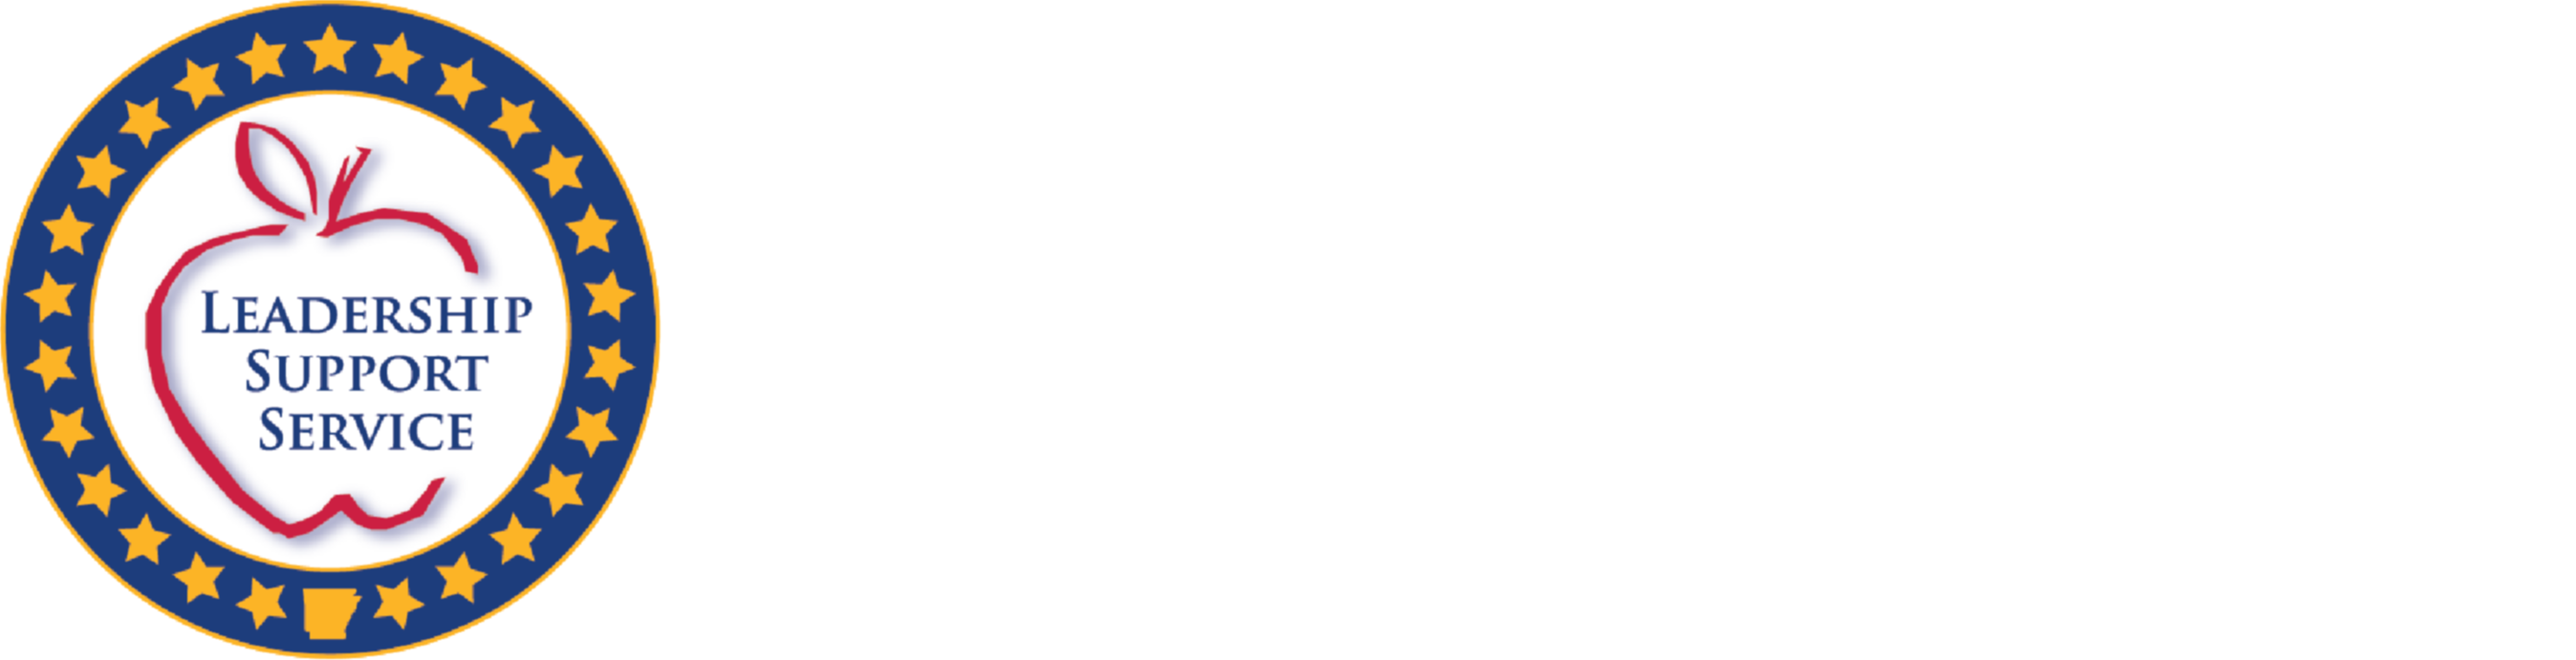 State Required Information